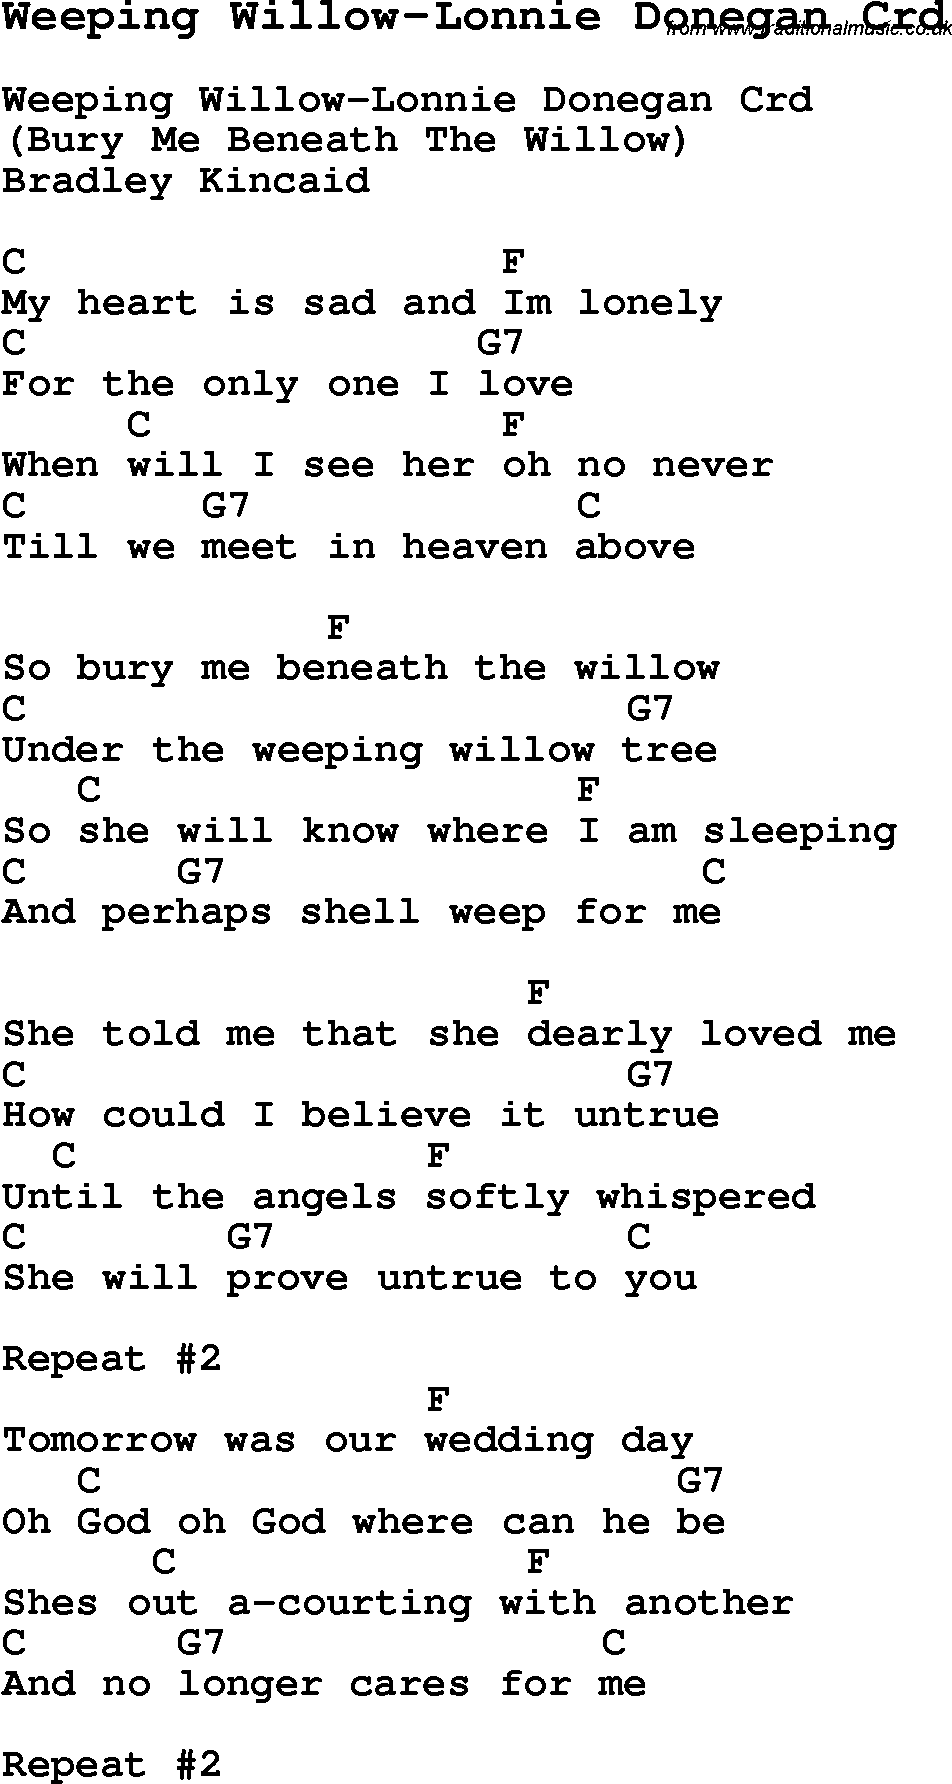 Skiffle Song Lyrics for Weeping Willow-Lonnie Donegan with chords for Mandolin, Ukulele, Guitar, Banjo etc.